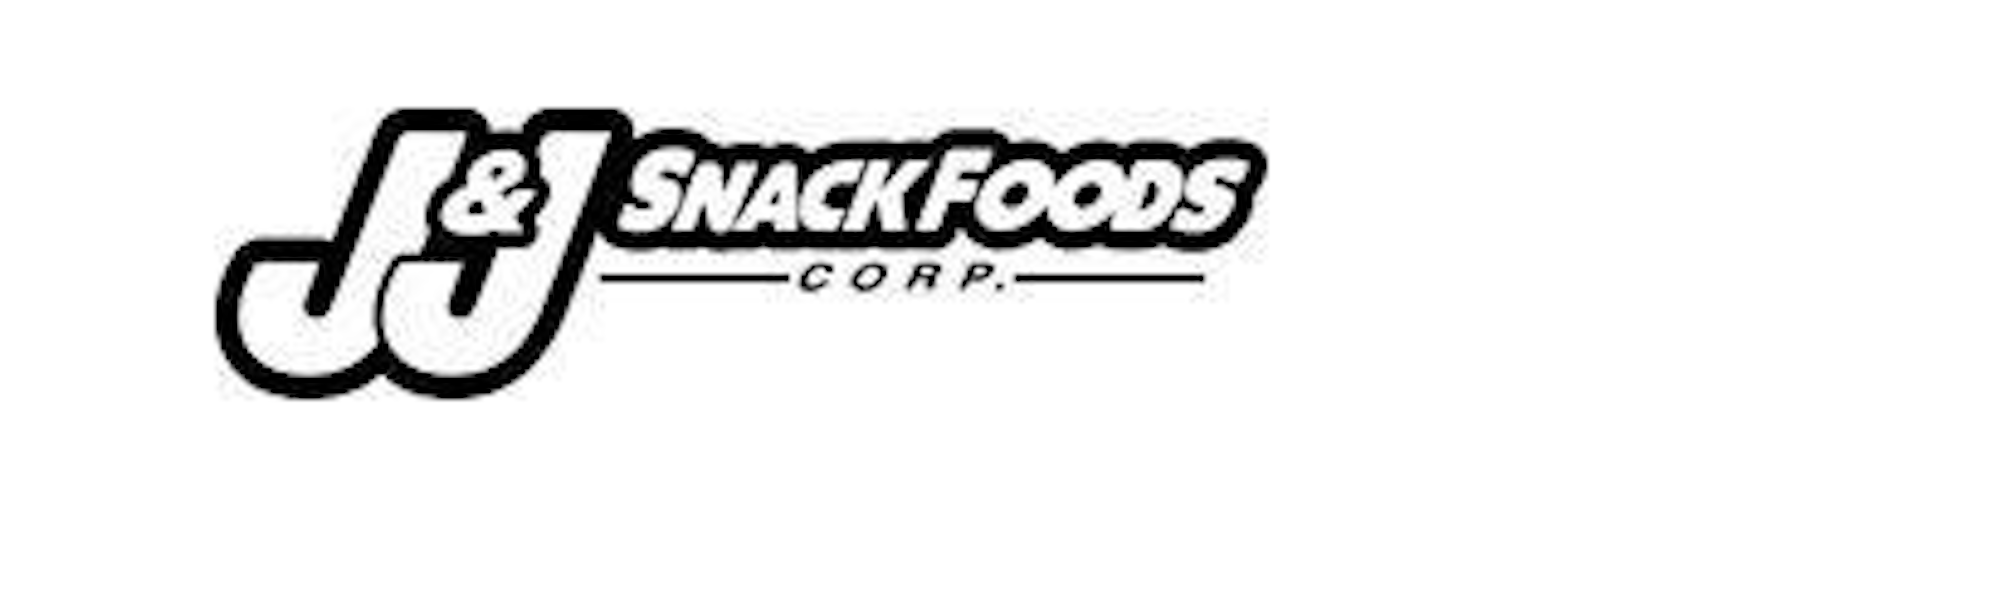 J & J Snack Foods Reports Second Quarter Sales And Earnings | Vending ...